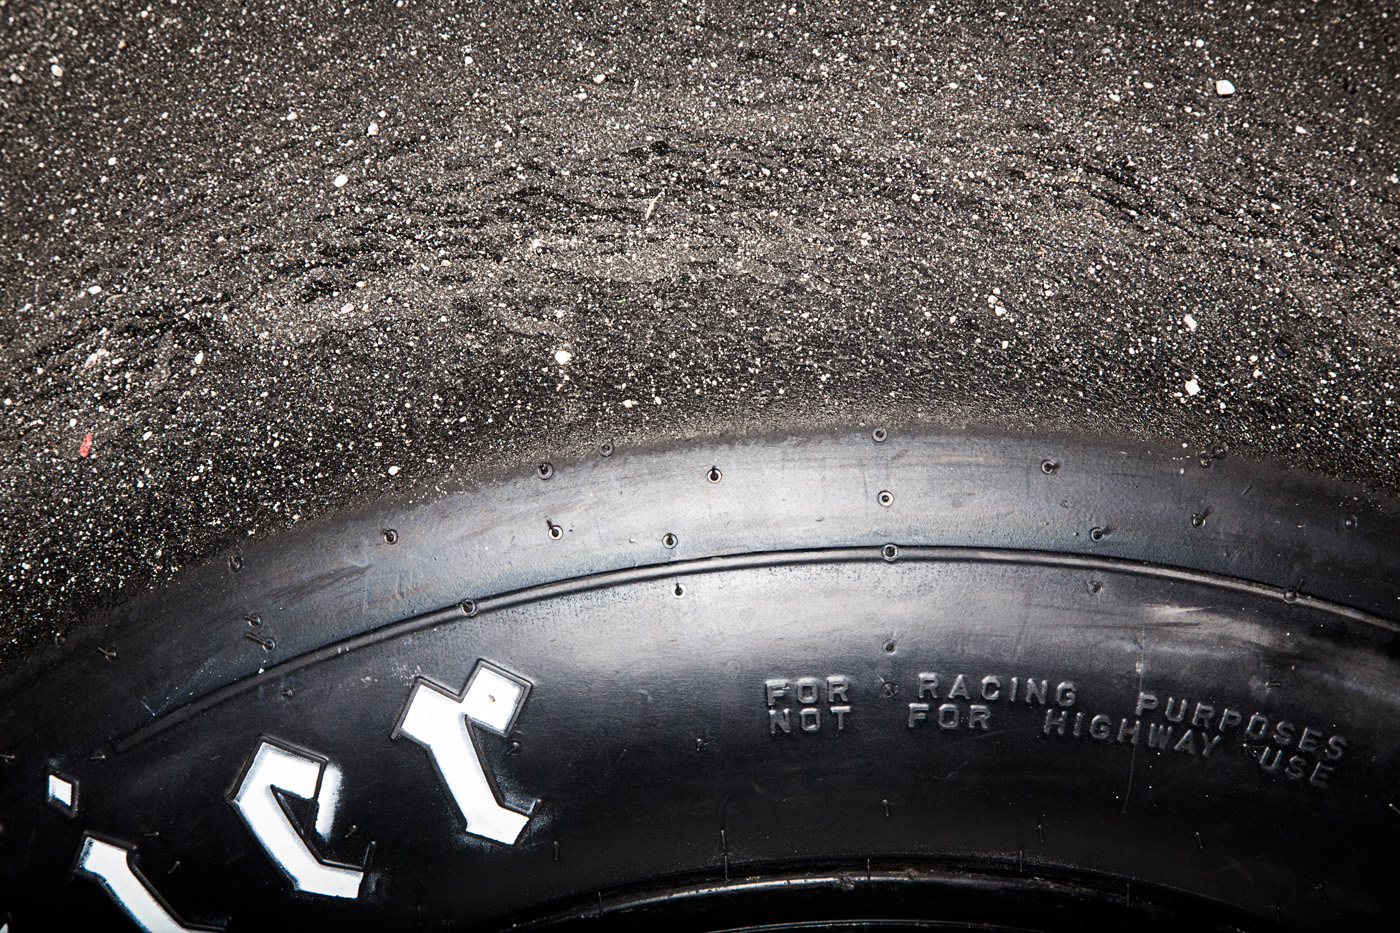 Photography detail of Racing Tire during Vintage Race at Circut of America's track located in Austin, TX.